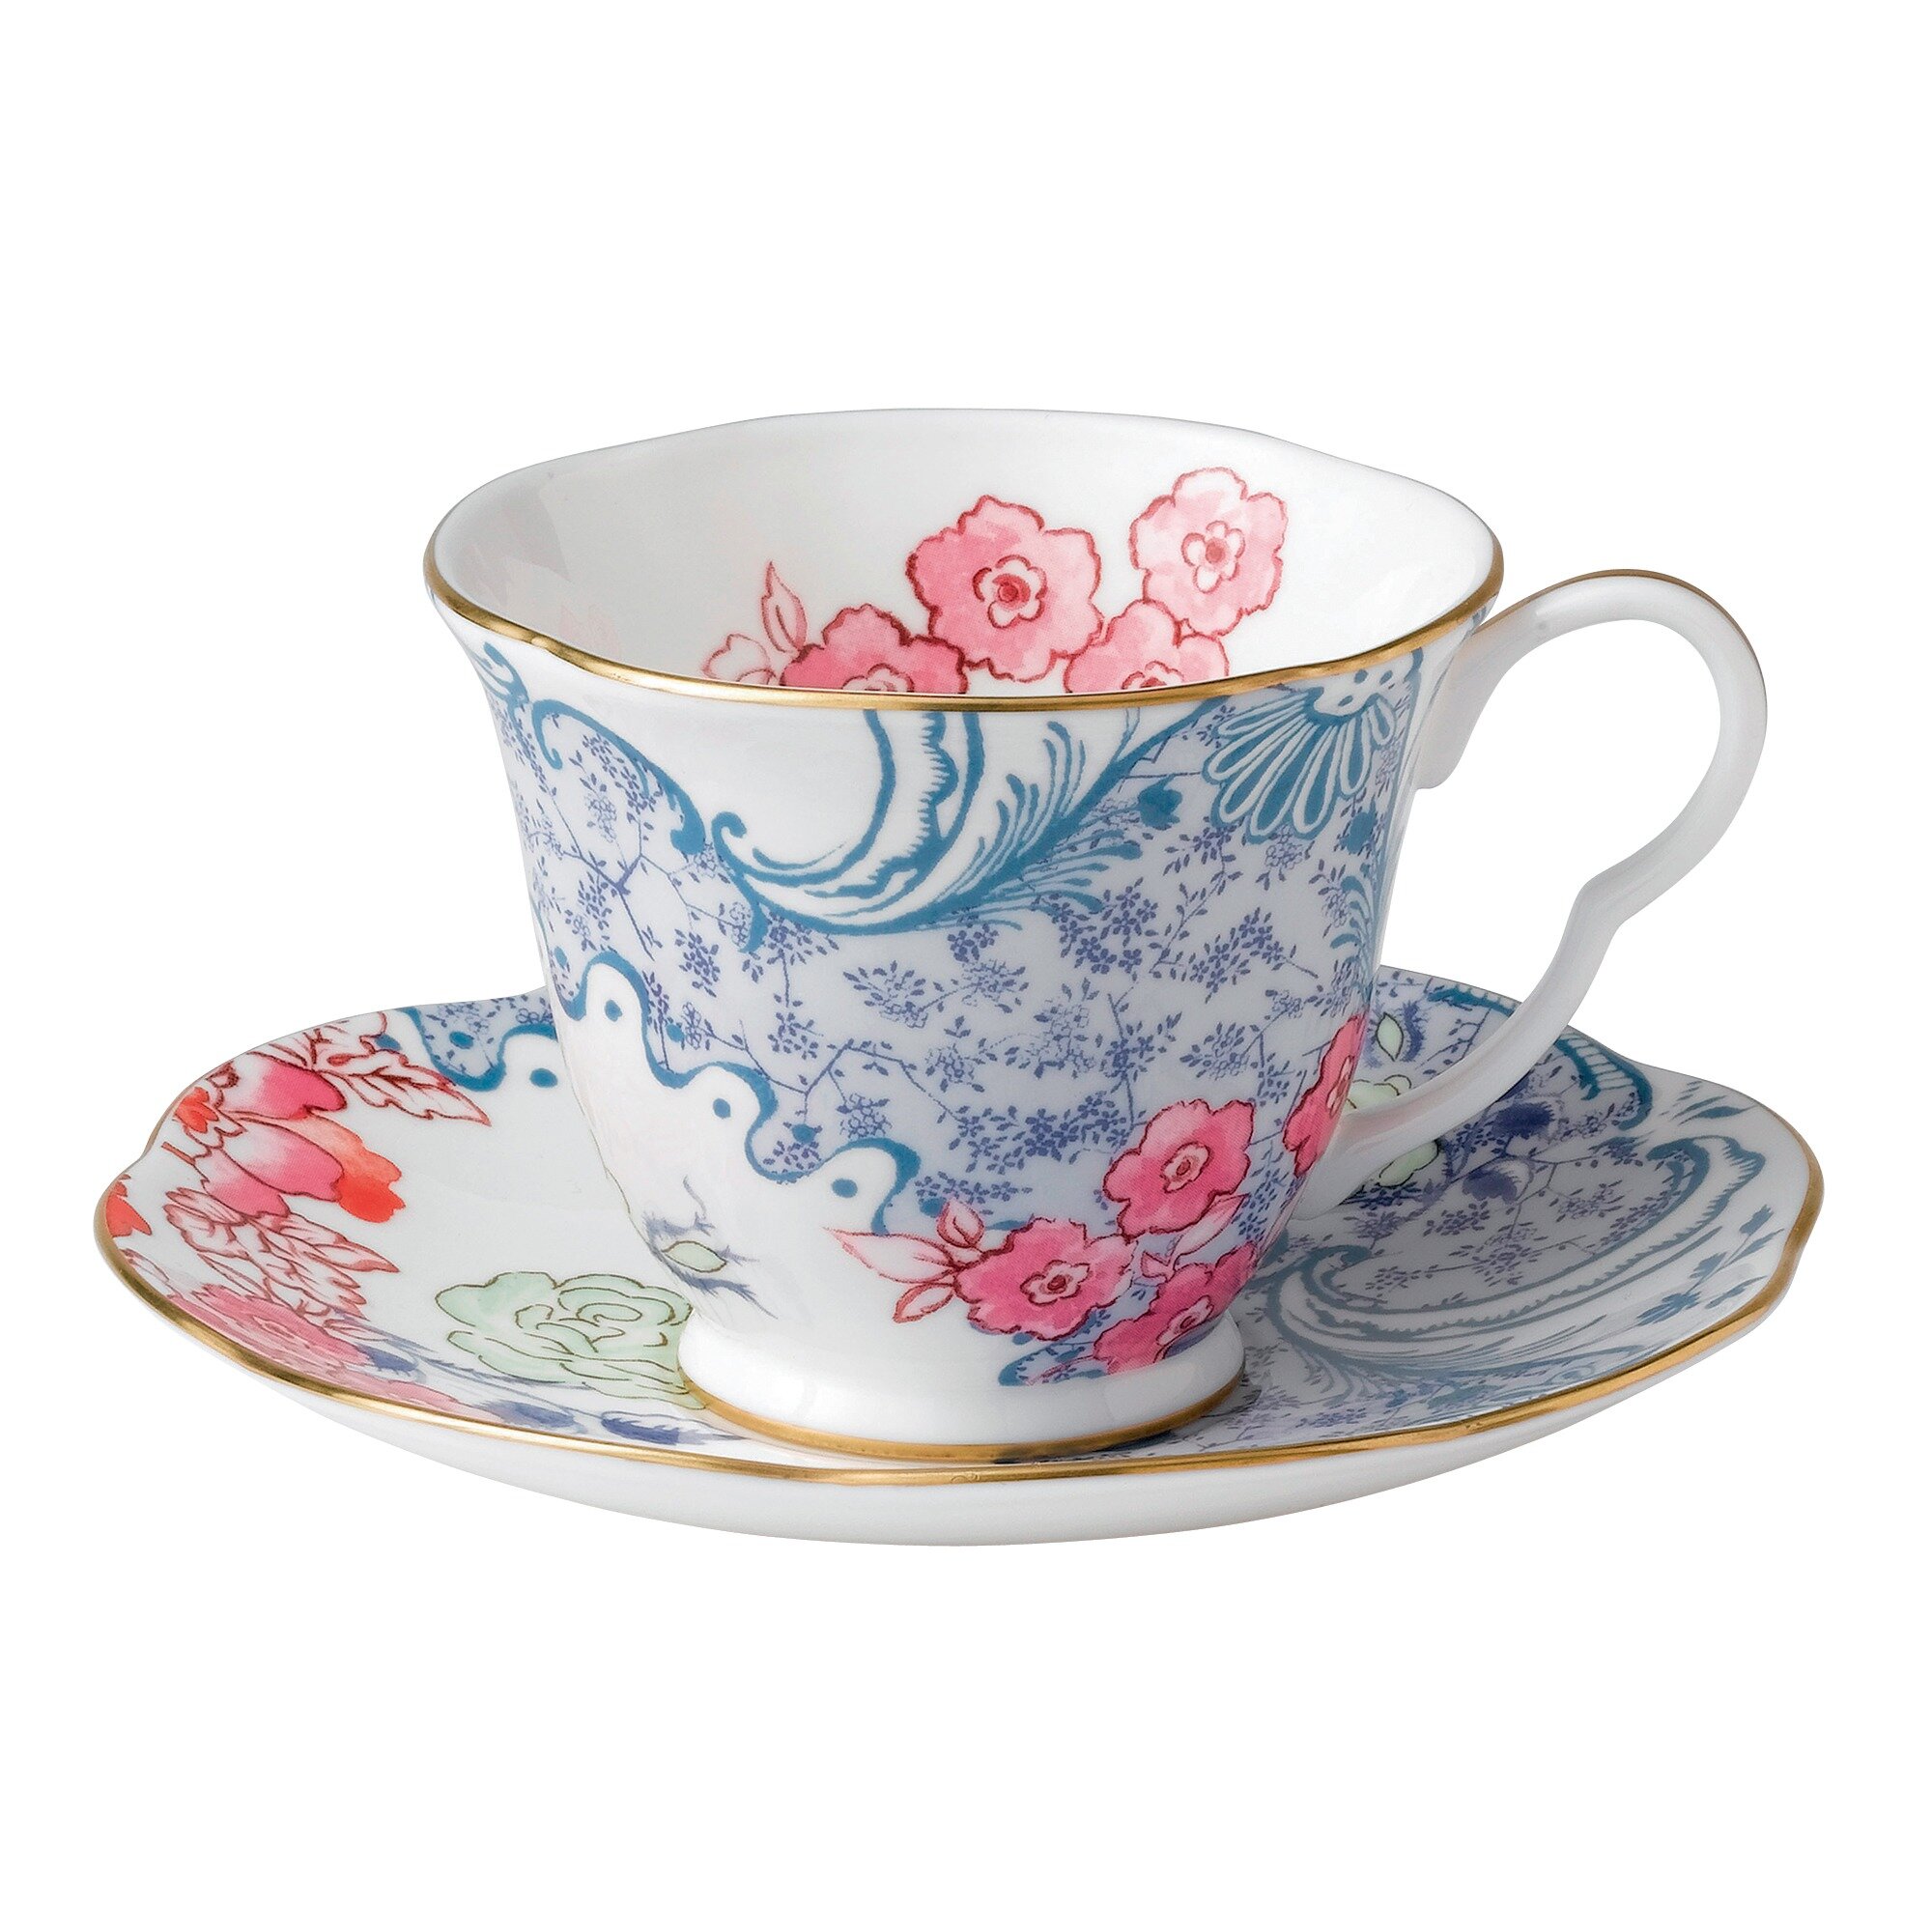 Wedgwood Butterfly Bloom Blue Peony Teacup & Saucer